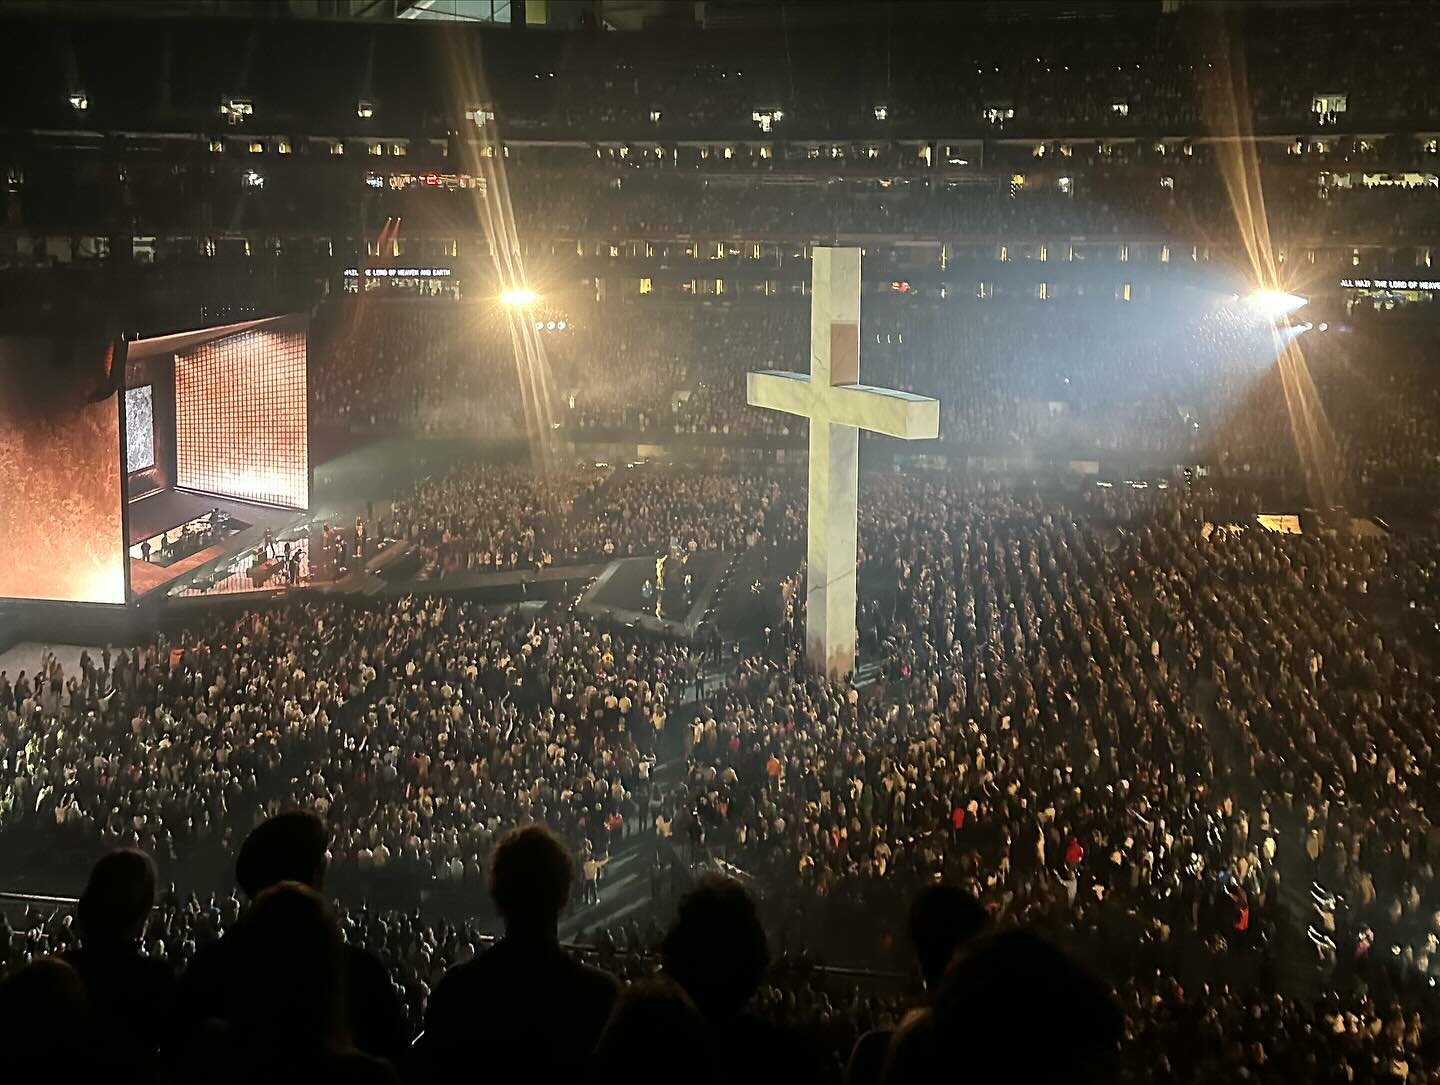 Almost 80 Madison Ridgeland Academy seniors joined between 50 and 55,000 worshippers at the Mercedes Benz Stadium in Atlanta on Jan. 3 through Jan. 5, for Passion 2024, a large Christian worship conference for students ages 18 to 25 held annually.